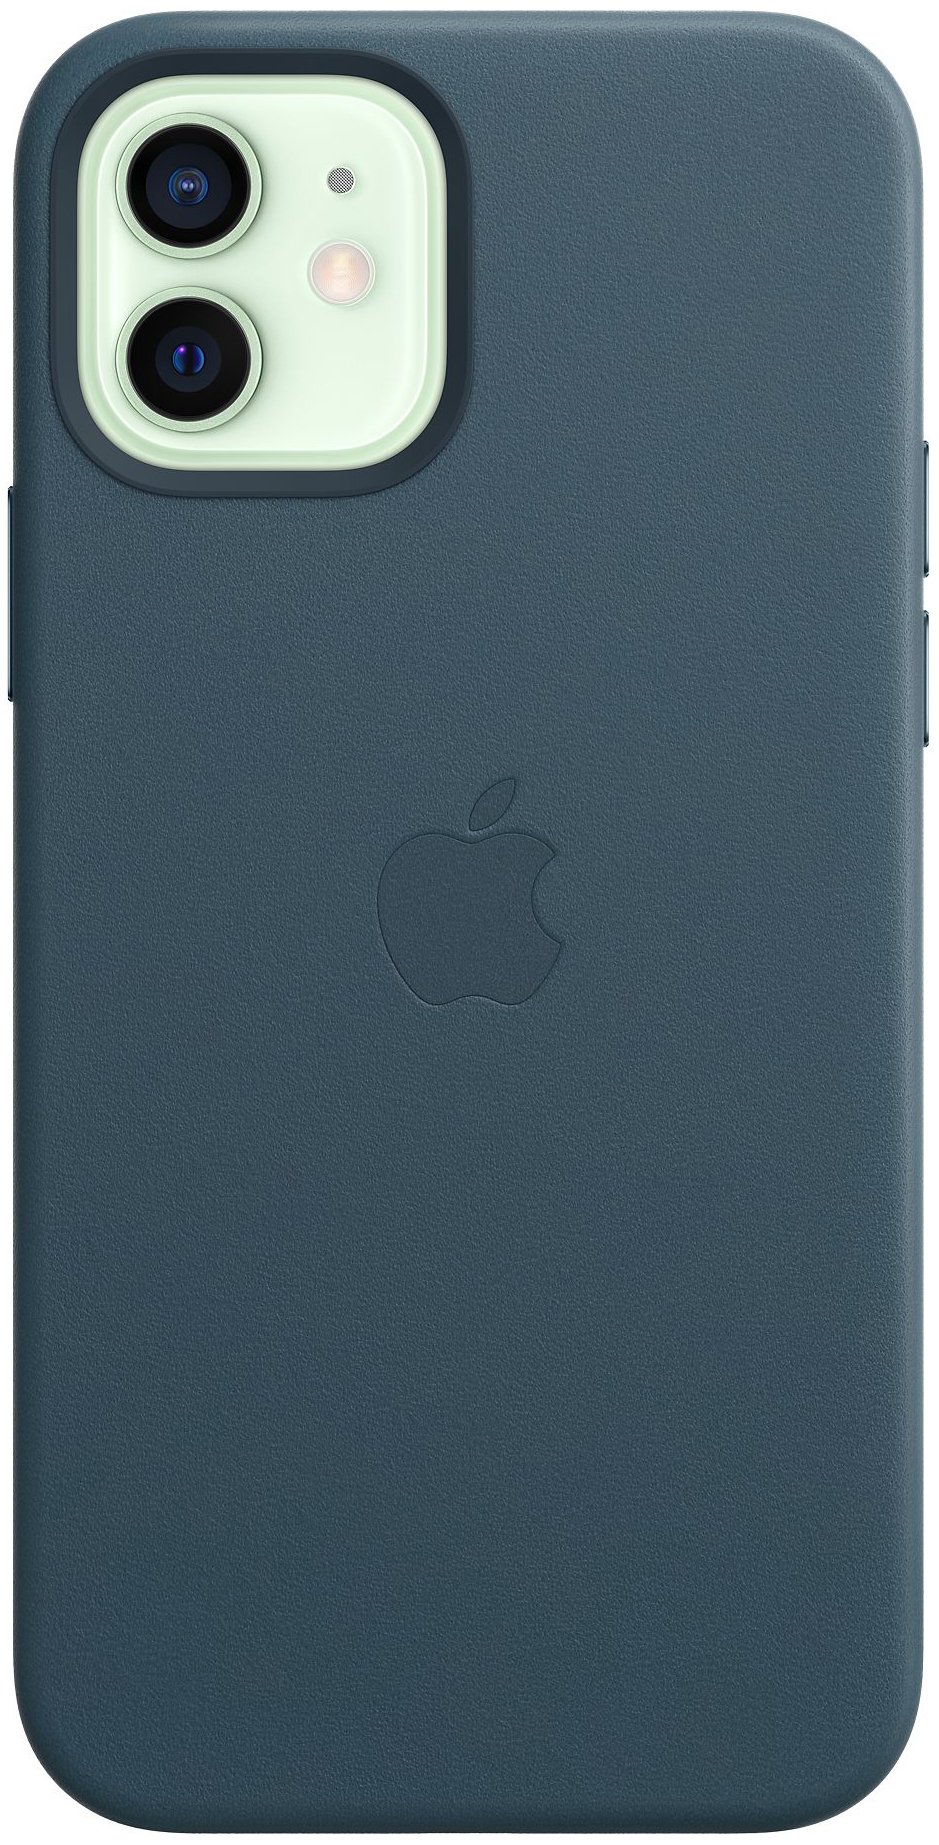 Iphone 12 12 Pro Leather Case With Magsafe